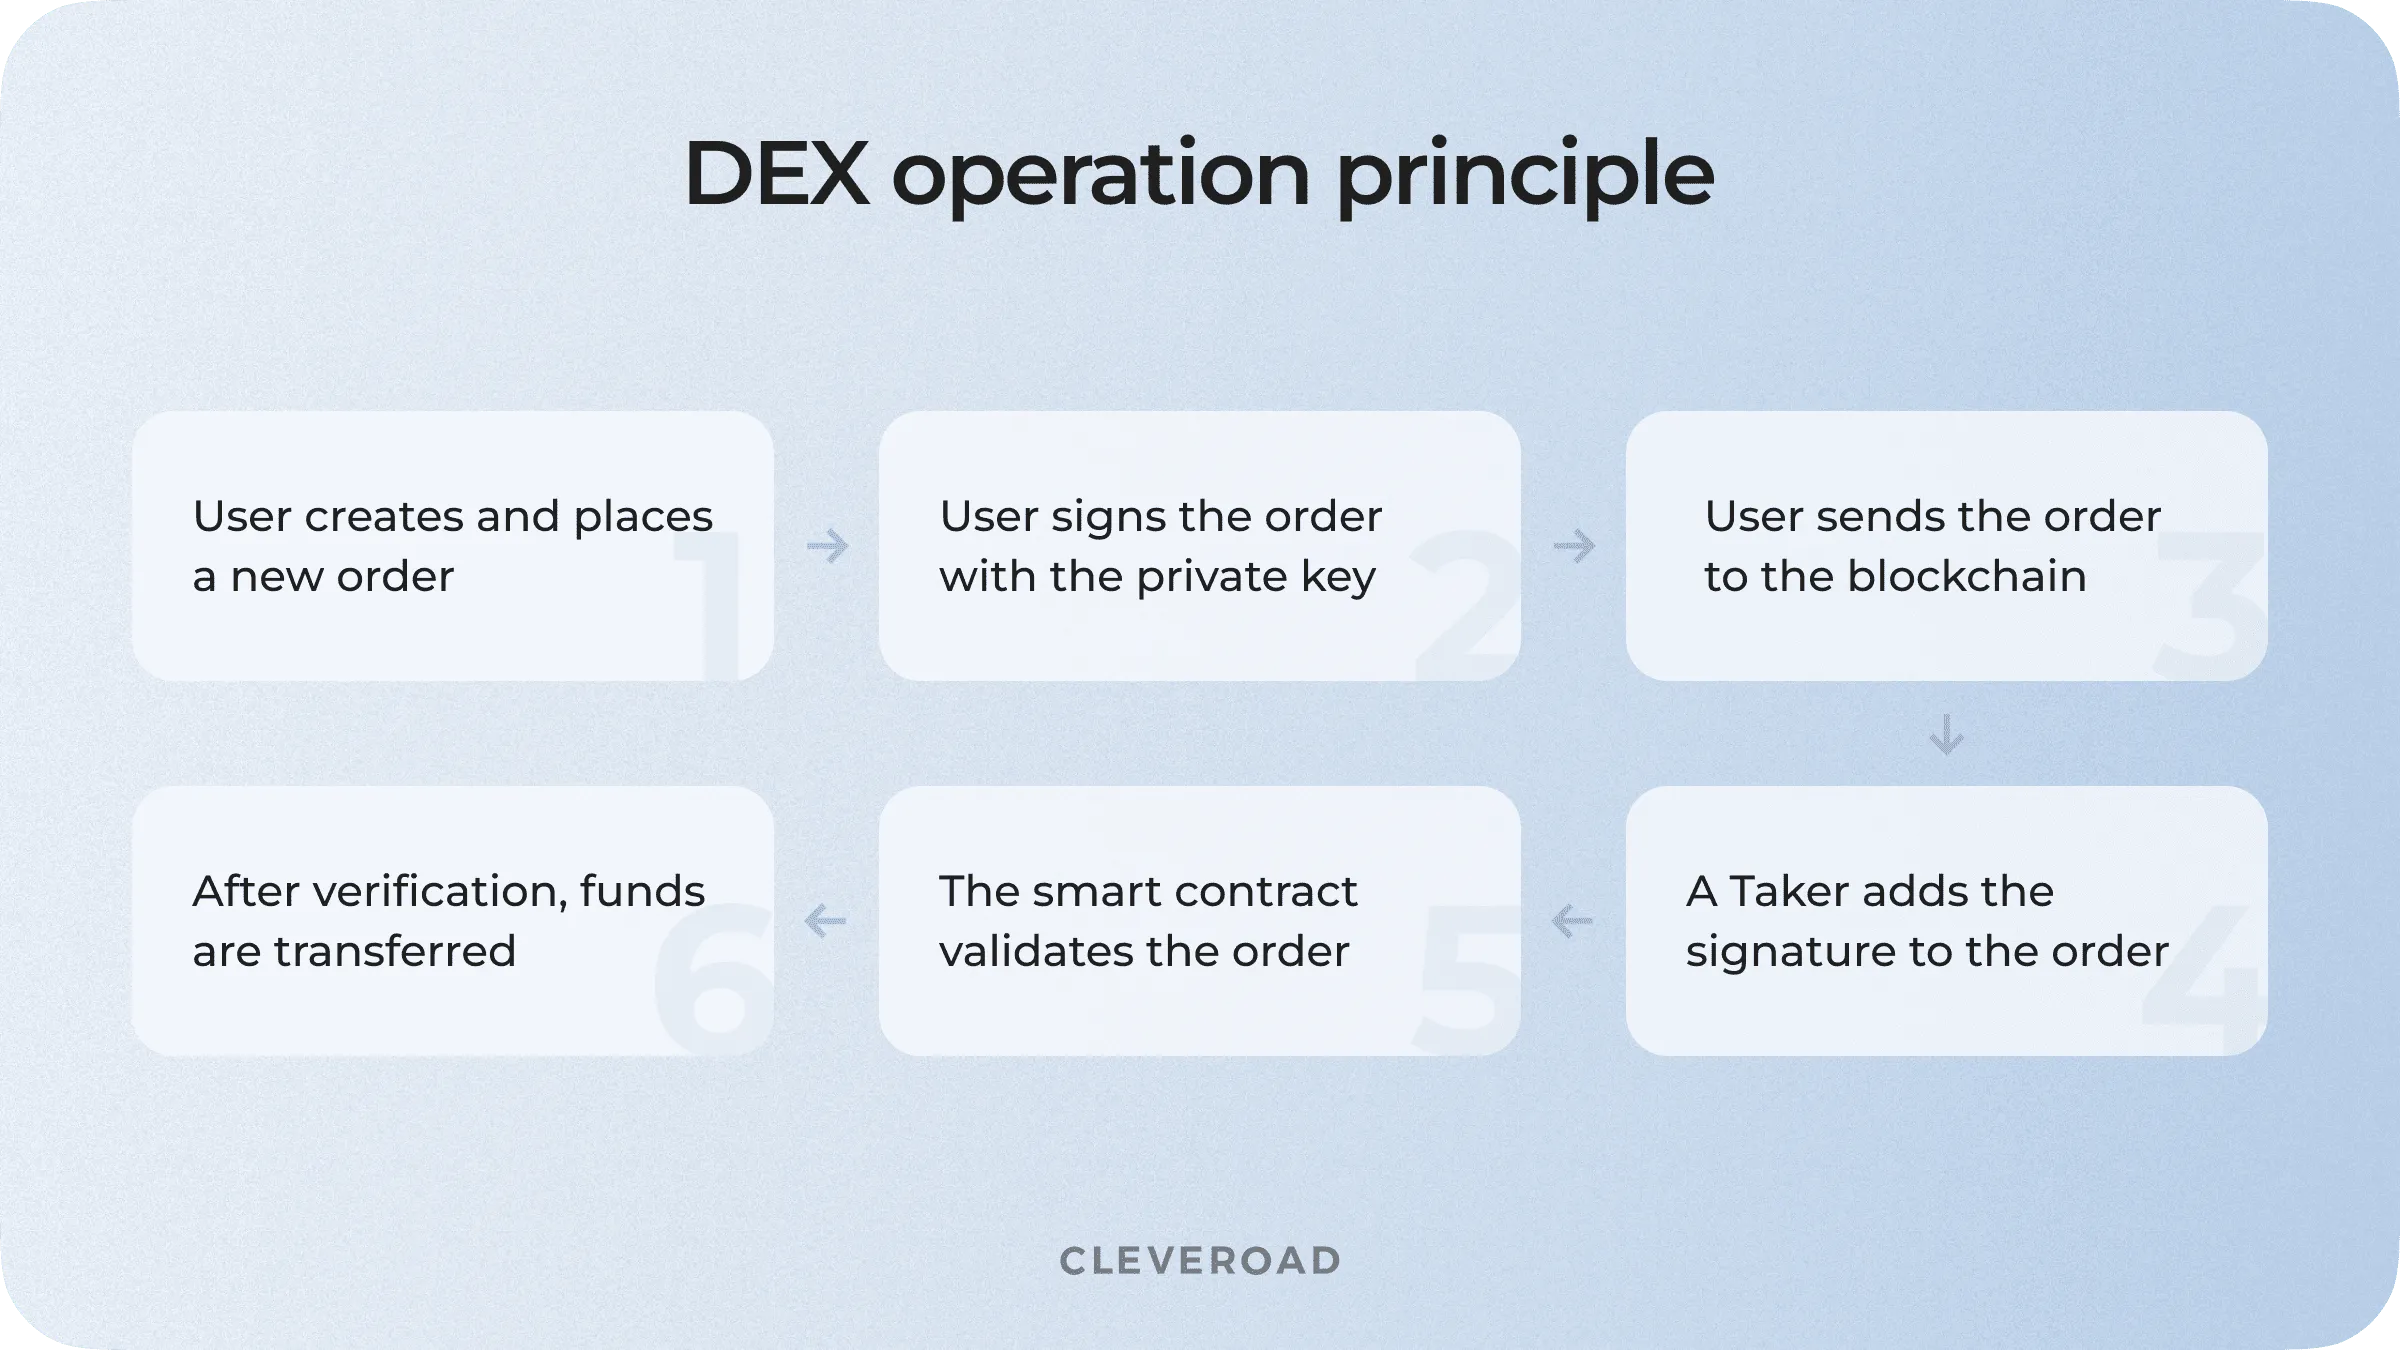 How DEX works for users: the core performance principle